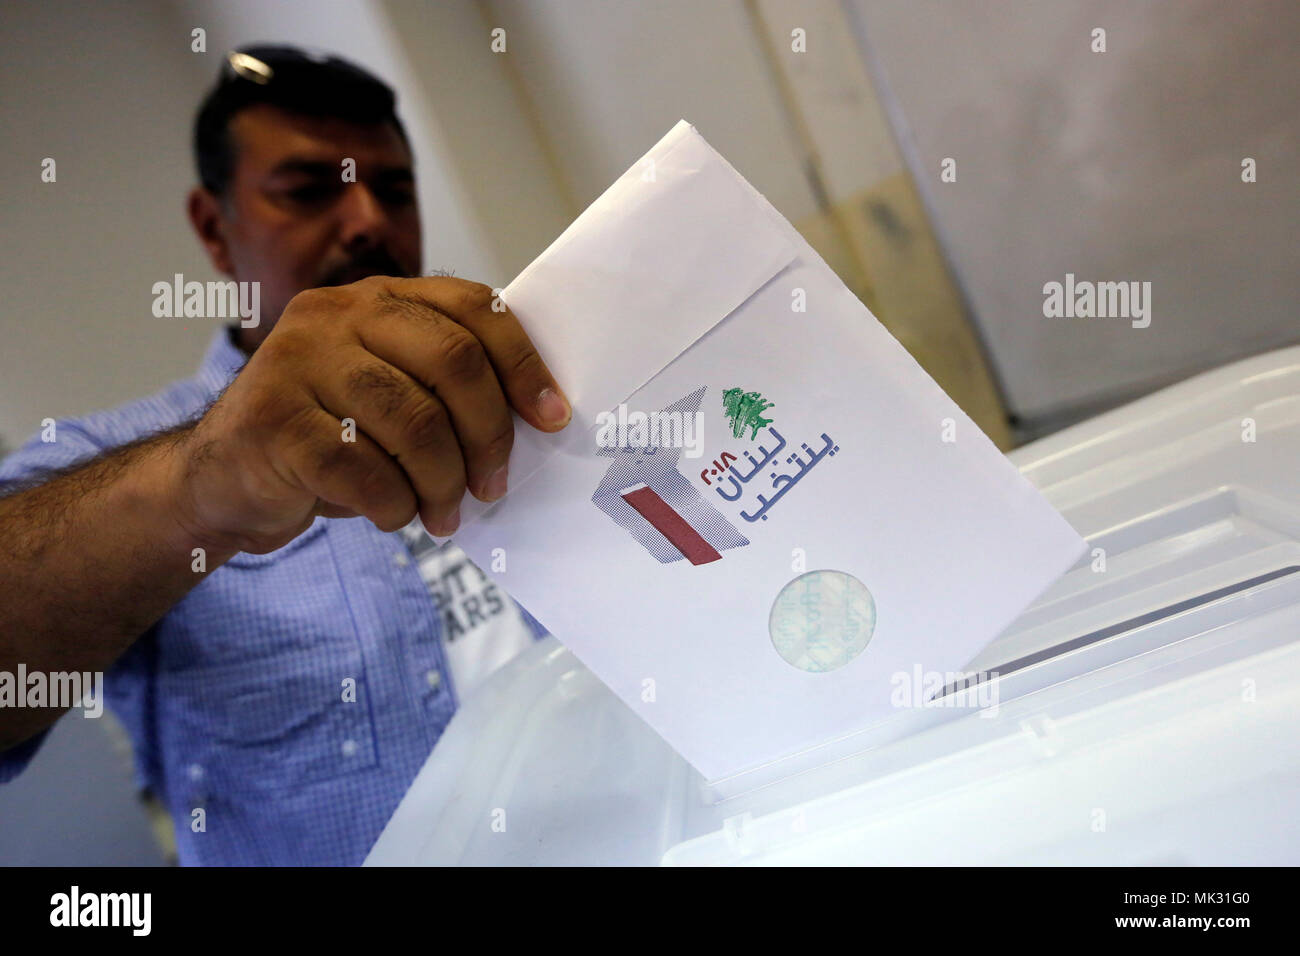 Beirut, Lebanon. 6th May, 2018. A man casts his ballot in a polling station in Beirut, Lebanon, on May 6, 2018. Some 3.7 million Lebanese people are registered to cast their votes in the parliamentary elections on Sunday, the first of their kind since the adoption of a new law that allows proportional representation. Credit: Bilal Jawich/Xinhua/Alamy Live News Stock Photo